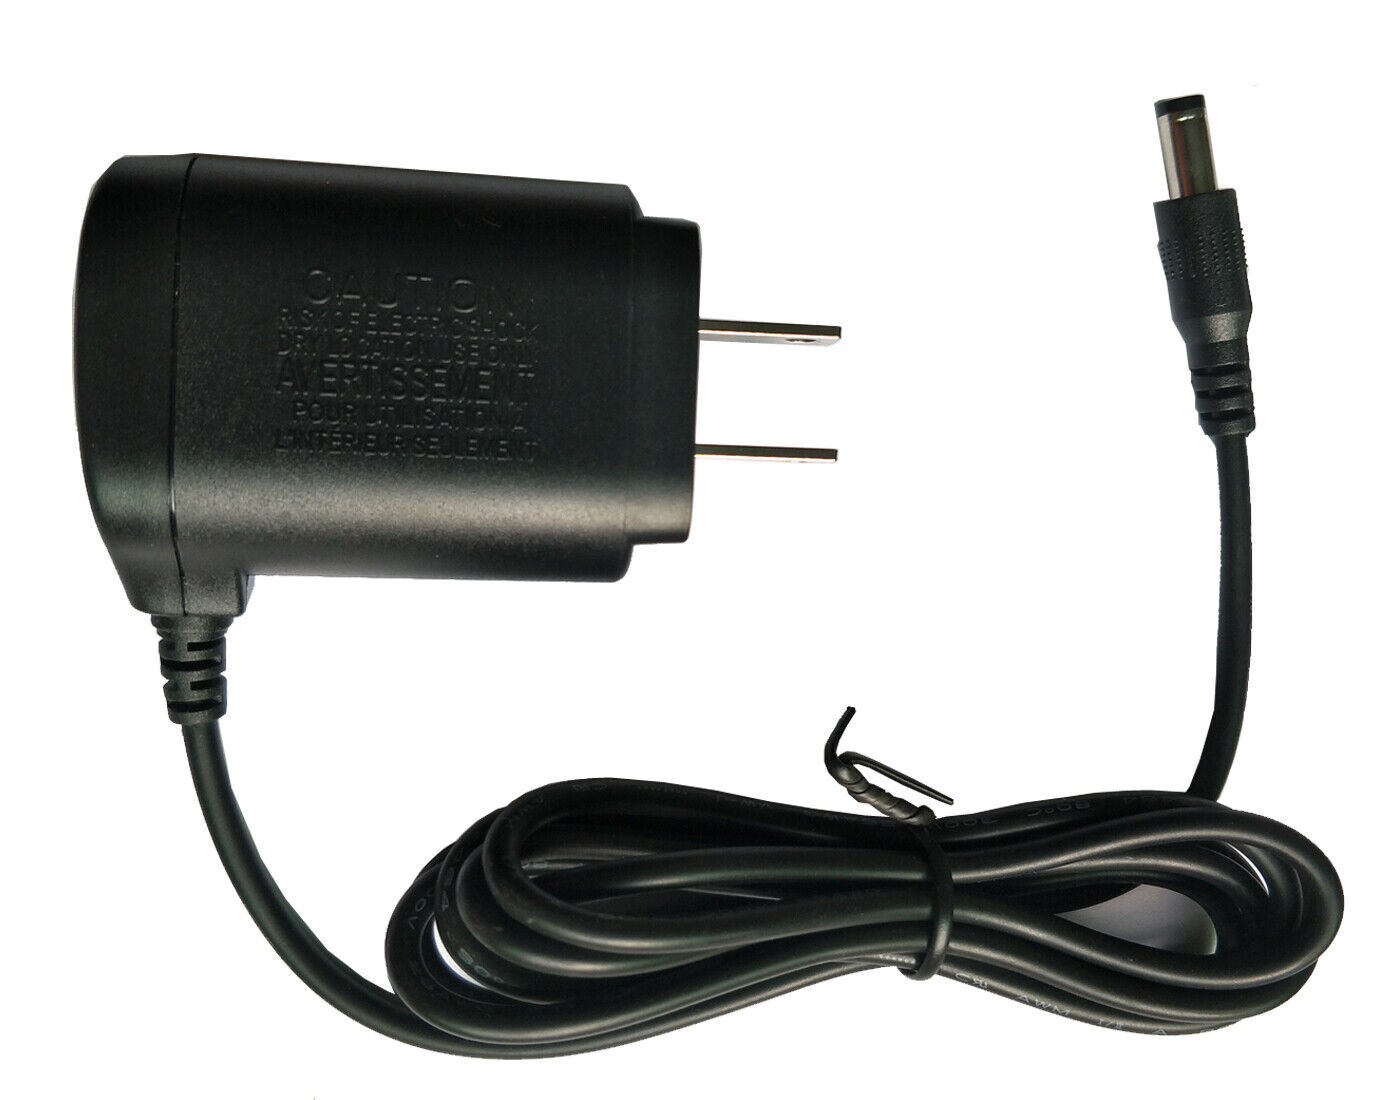 AC Adapter For Black & Decker 418337-07 5100684-03 Power Supply Battery Charger Type: AC/DC Adapter Features: Power